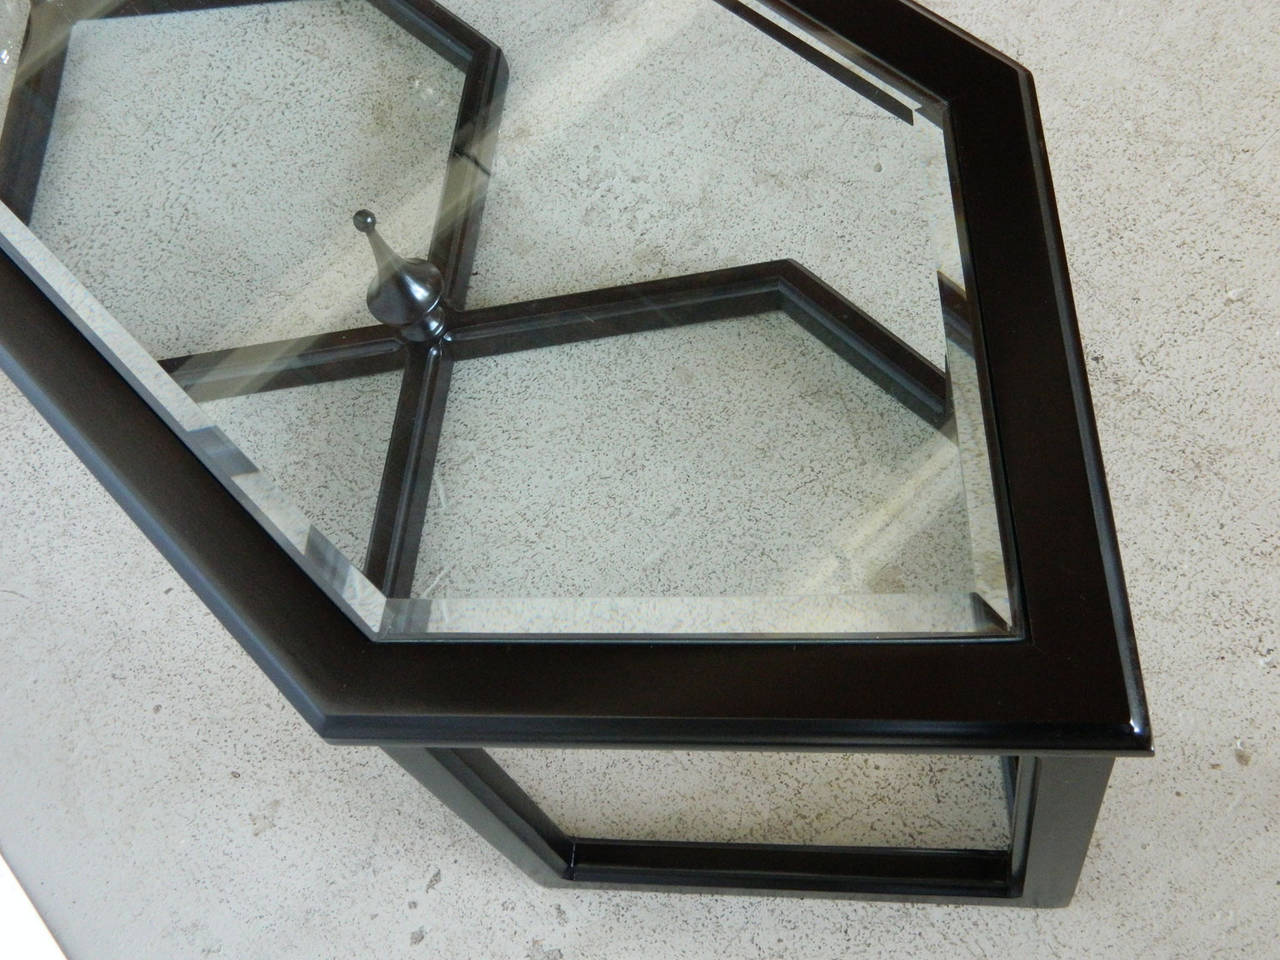 This Hollywood Regency style coffee table has a striking black painted finish and bevelled glass top.